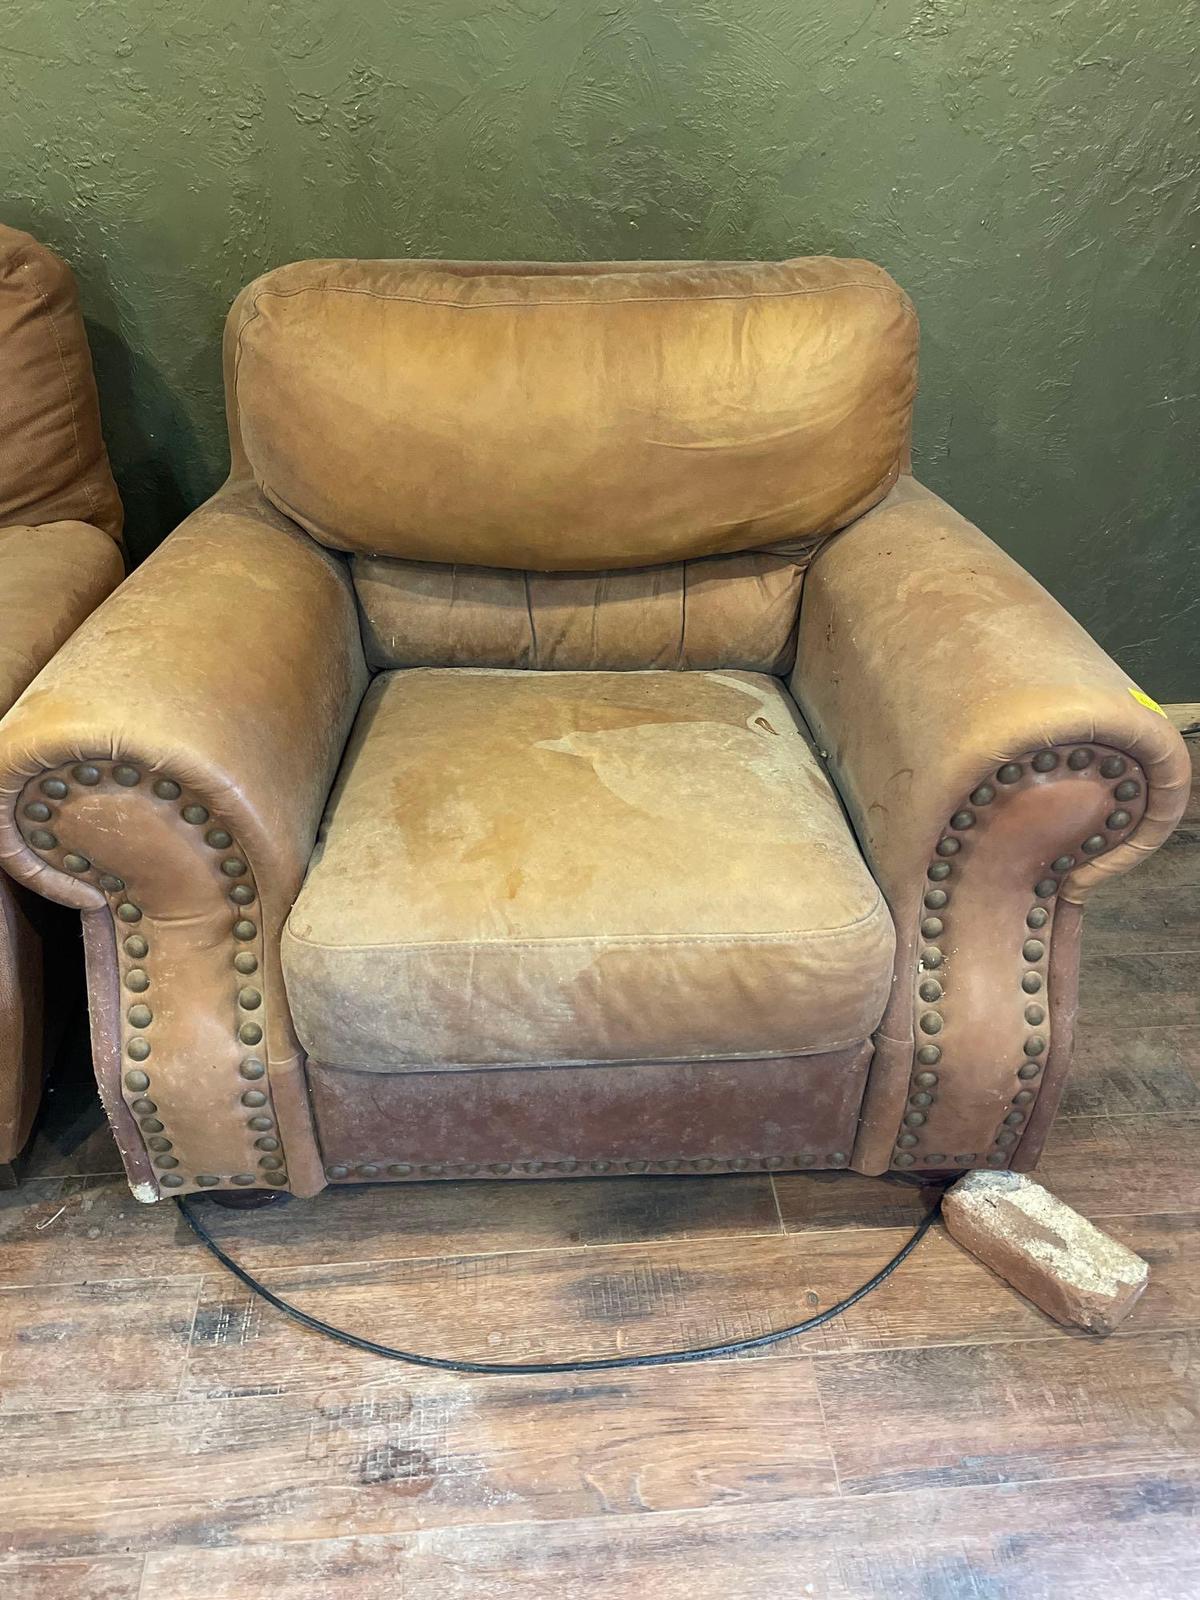 leather love seat